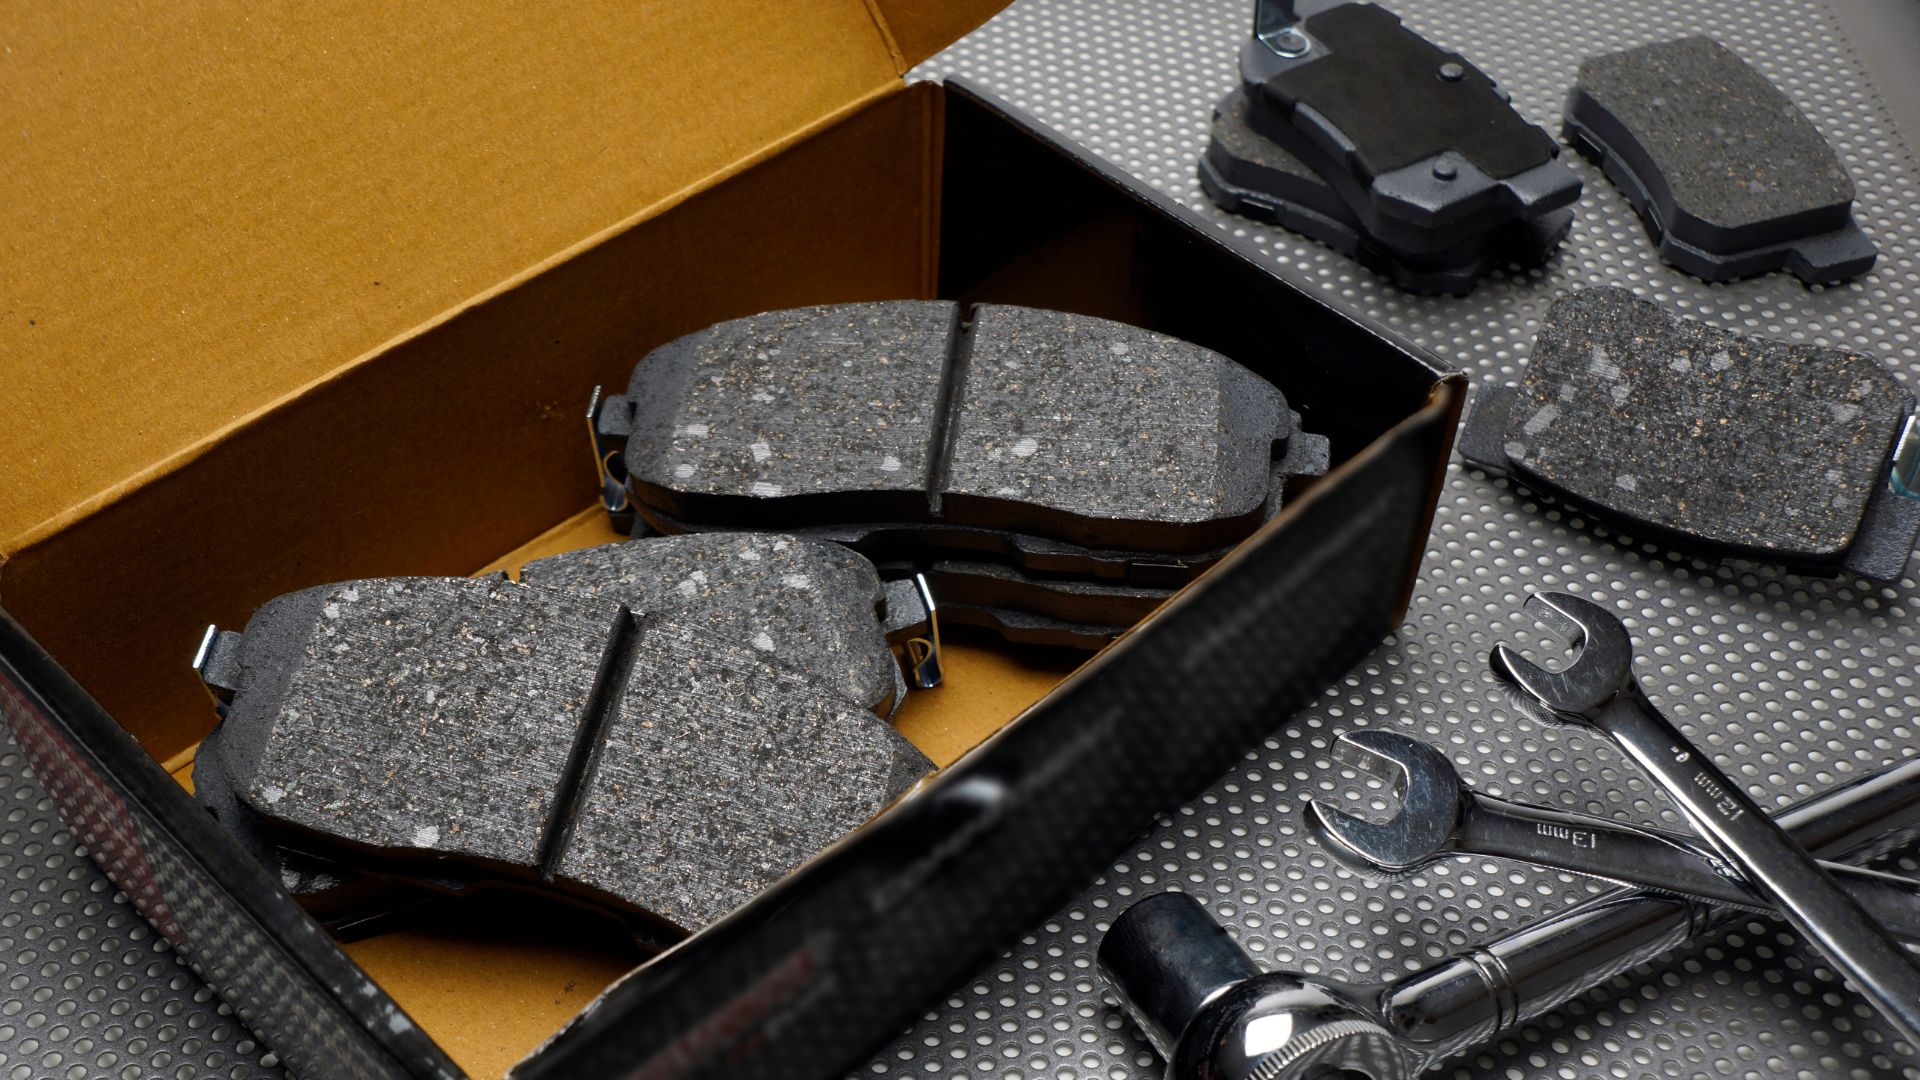 a box of brake pads and tools on a table.